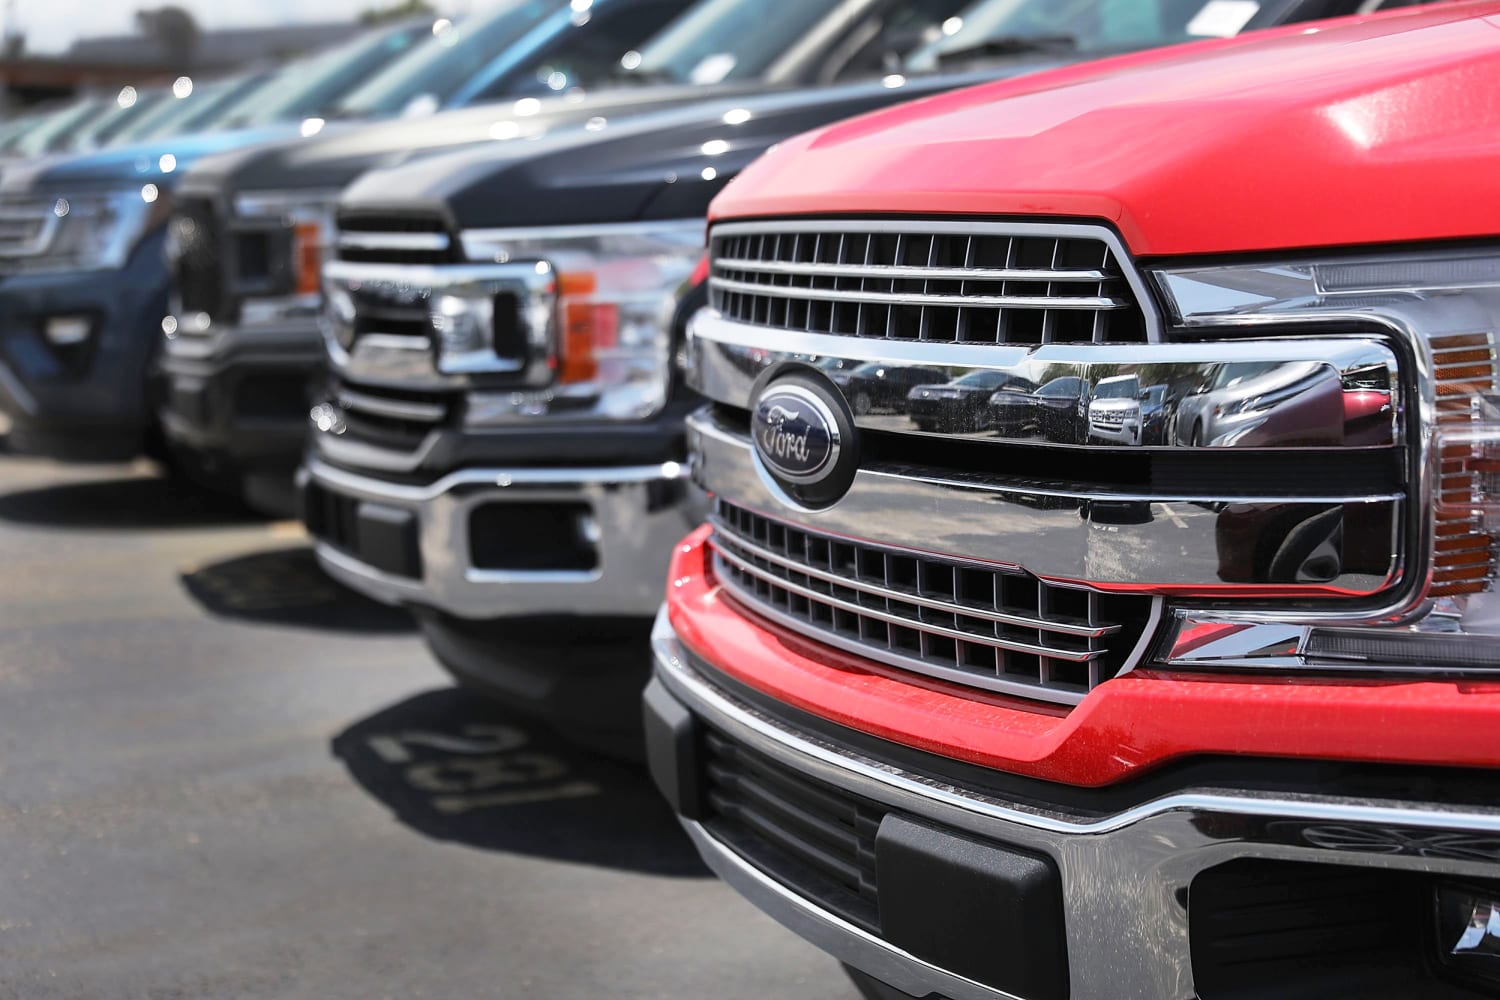 How a UAW strike could affect production of the popular Ford F-150 pickup truck